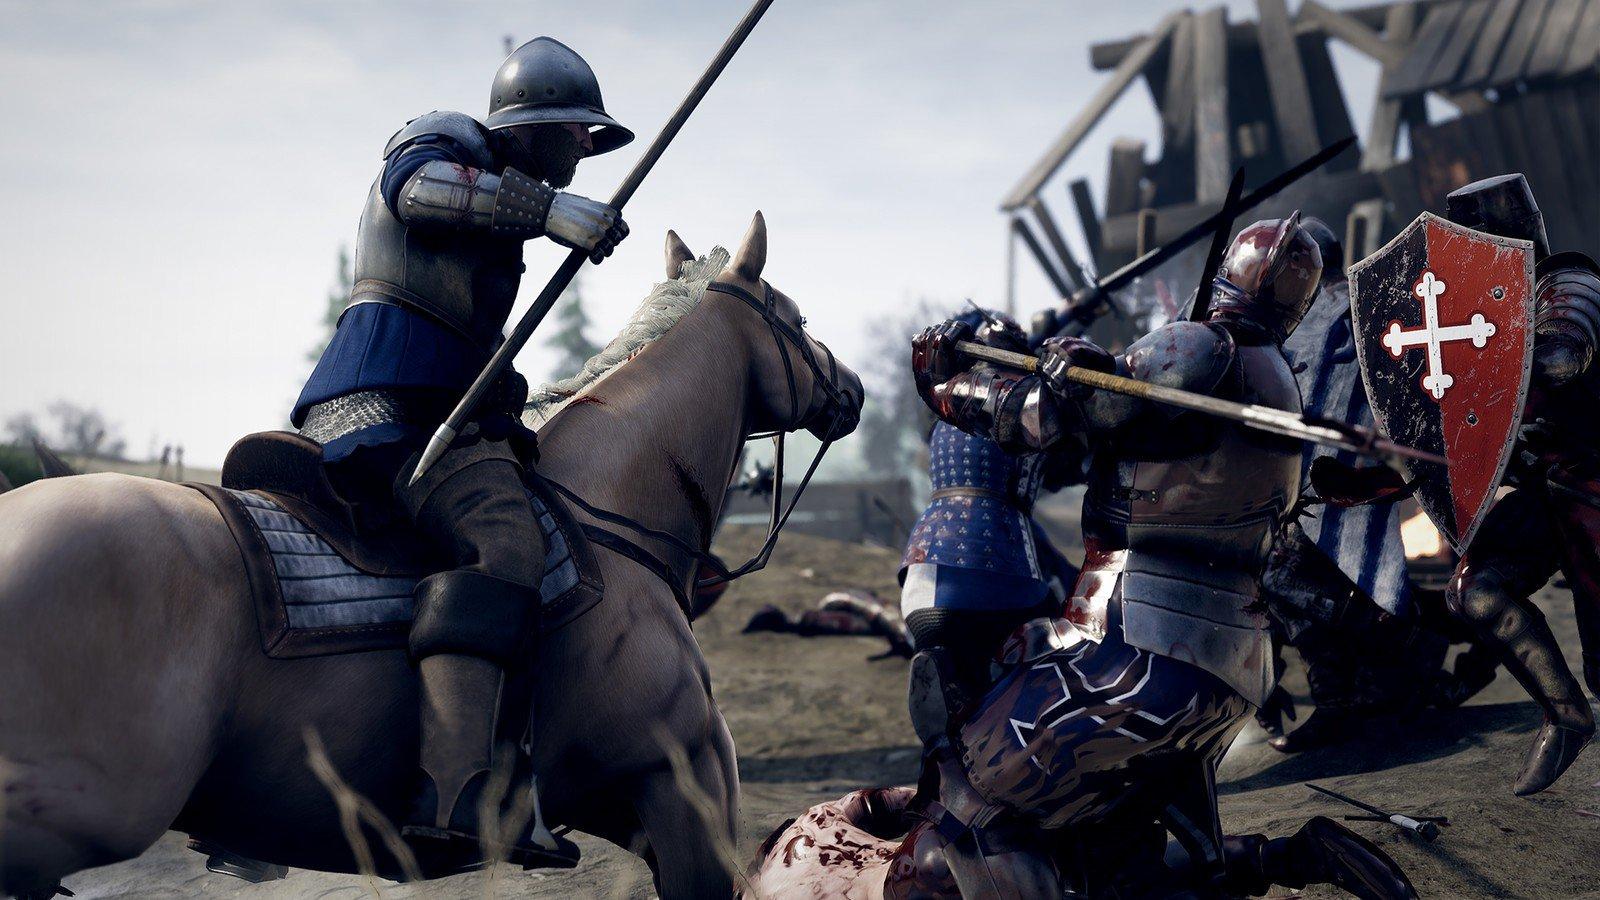 Mordhau is the best new PC game of 2019 that you haven't heard